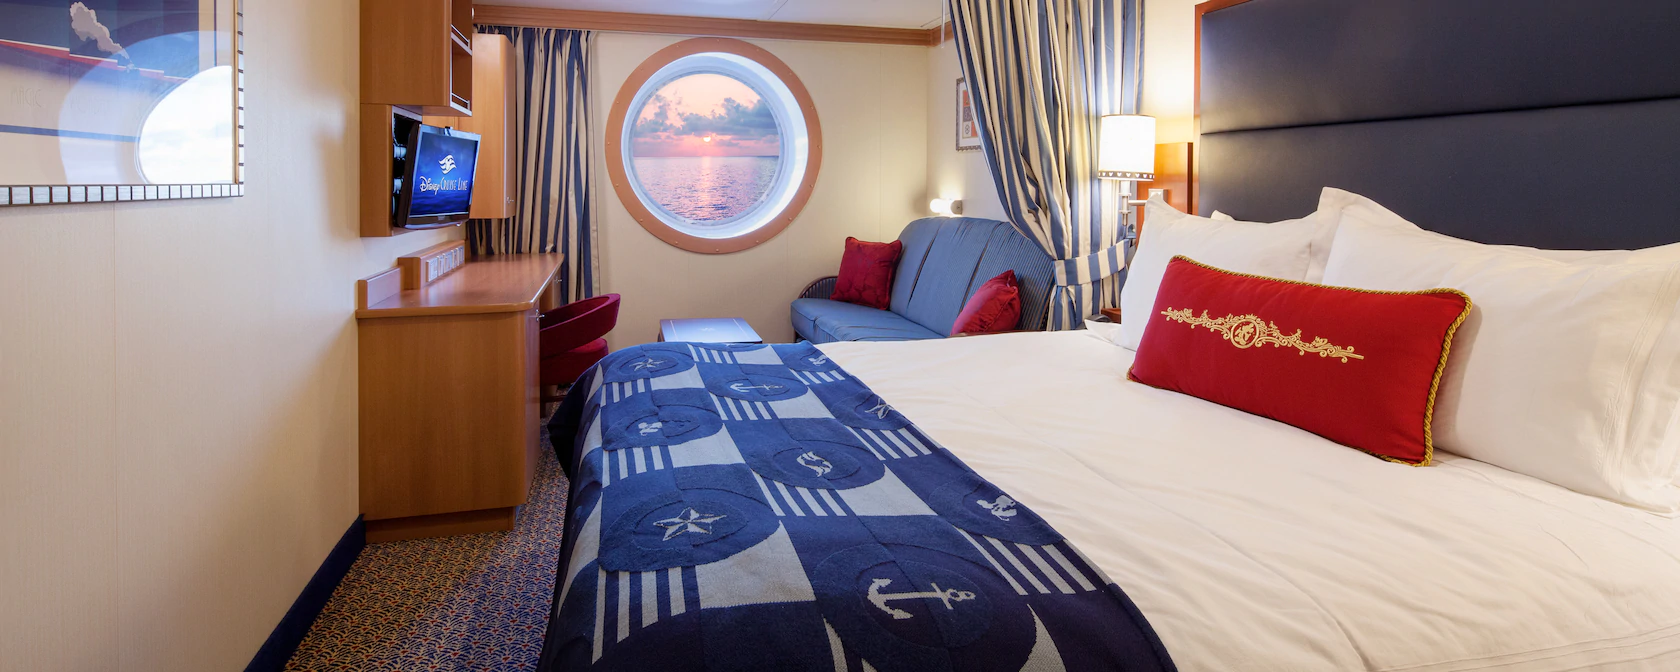 Disney Cruise Room Types And Categories Explained Featured Image